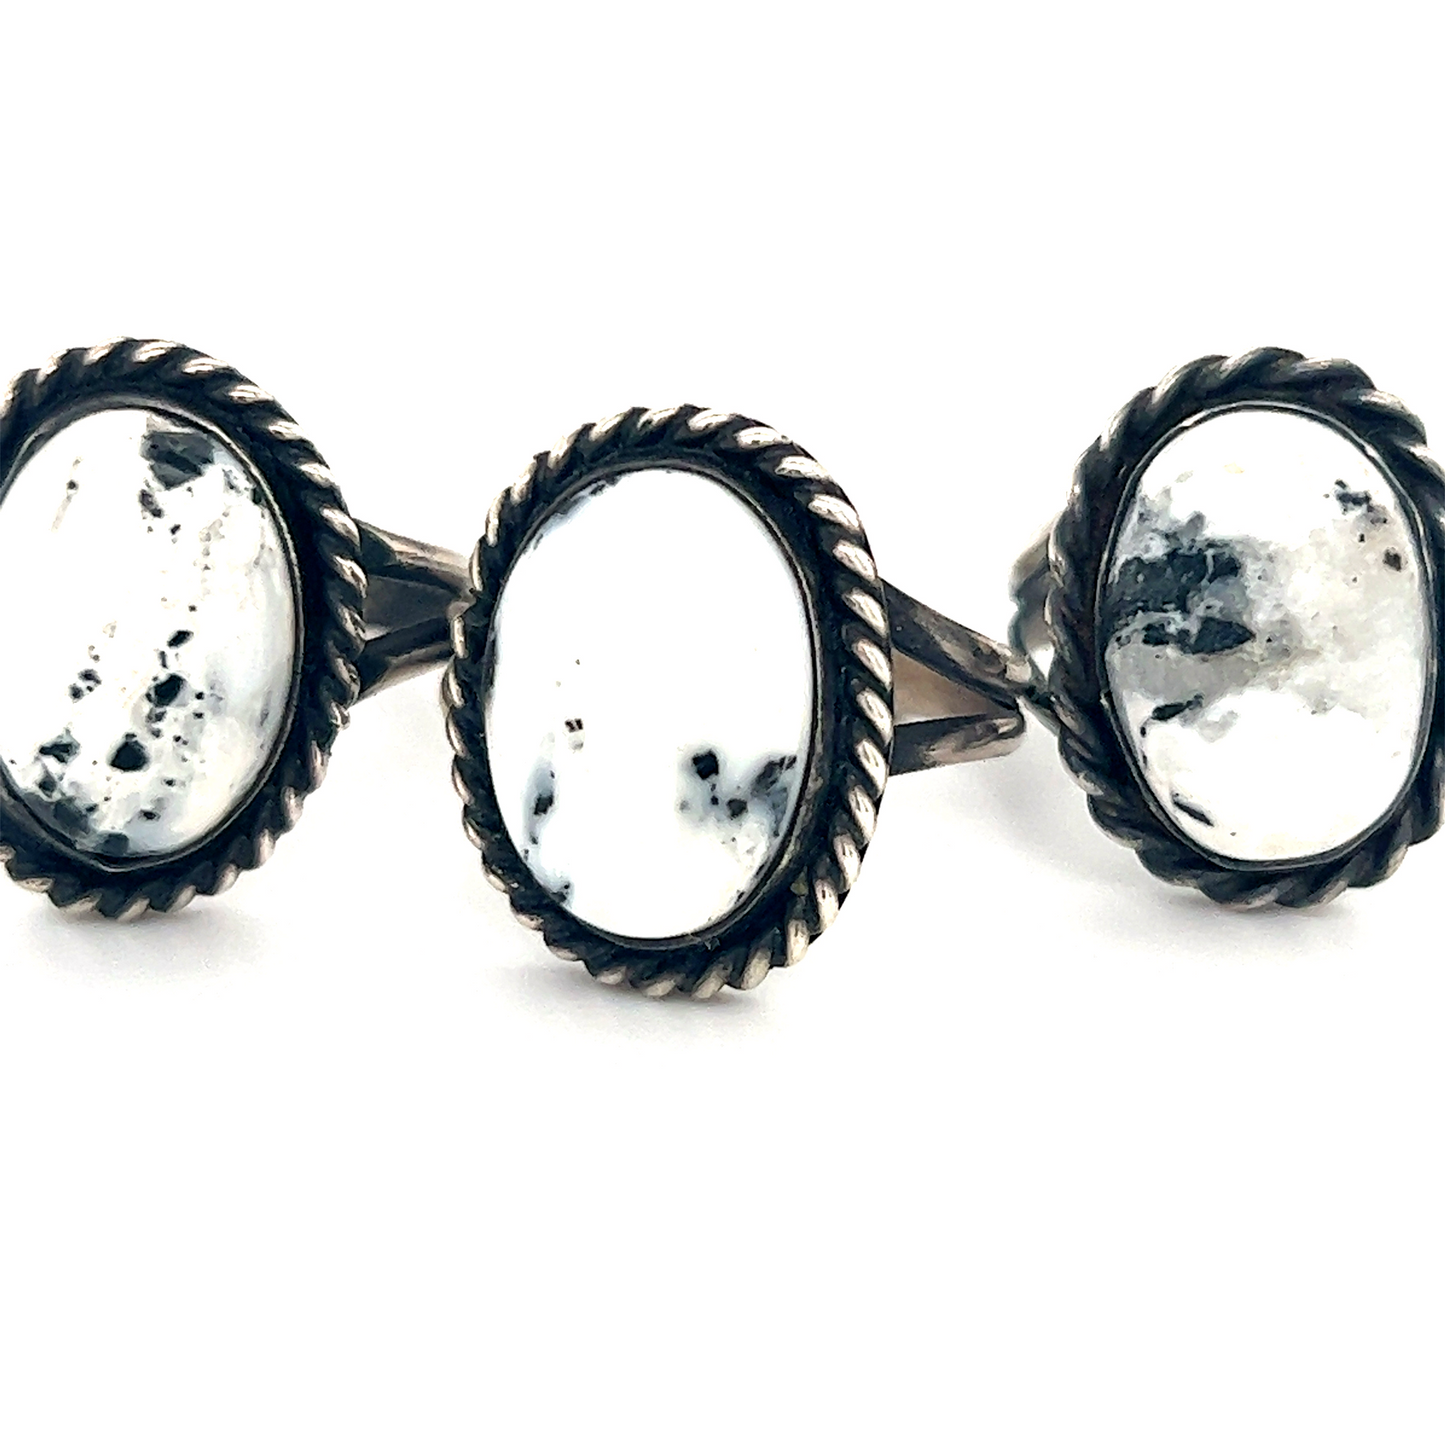 Three native inspired Unique White Buffalo Turquoise Rings with a white stone in the middle.